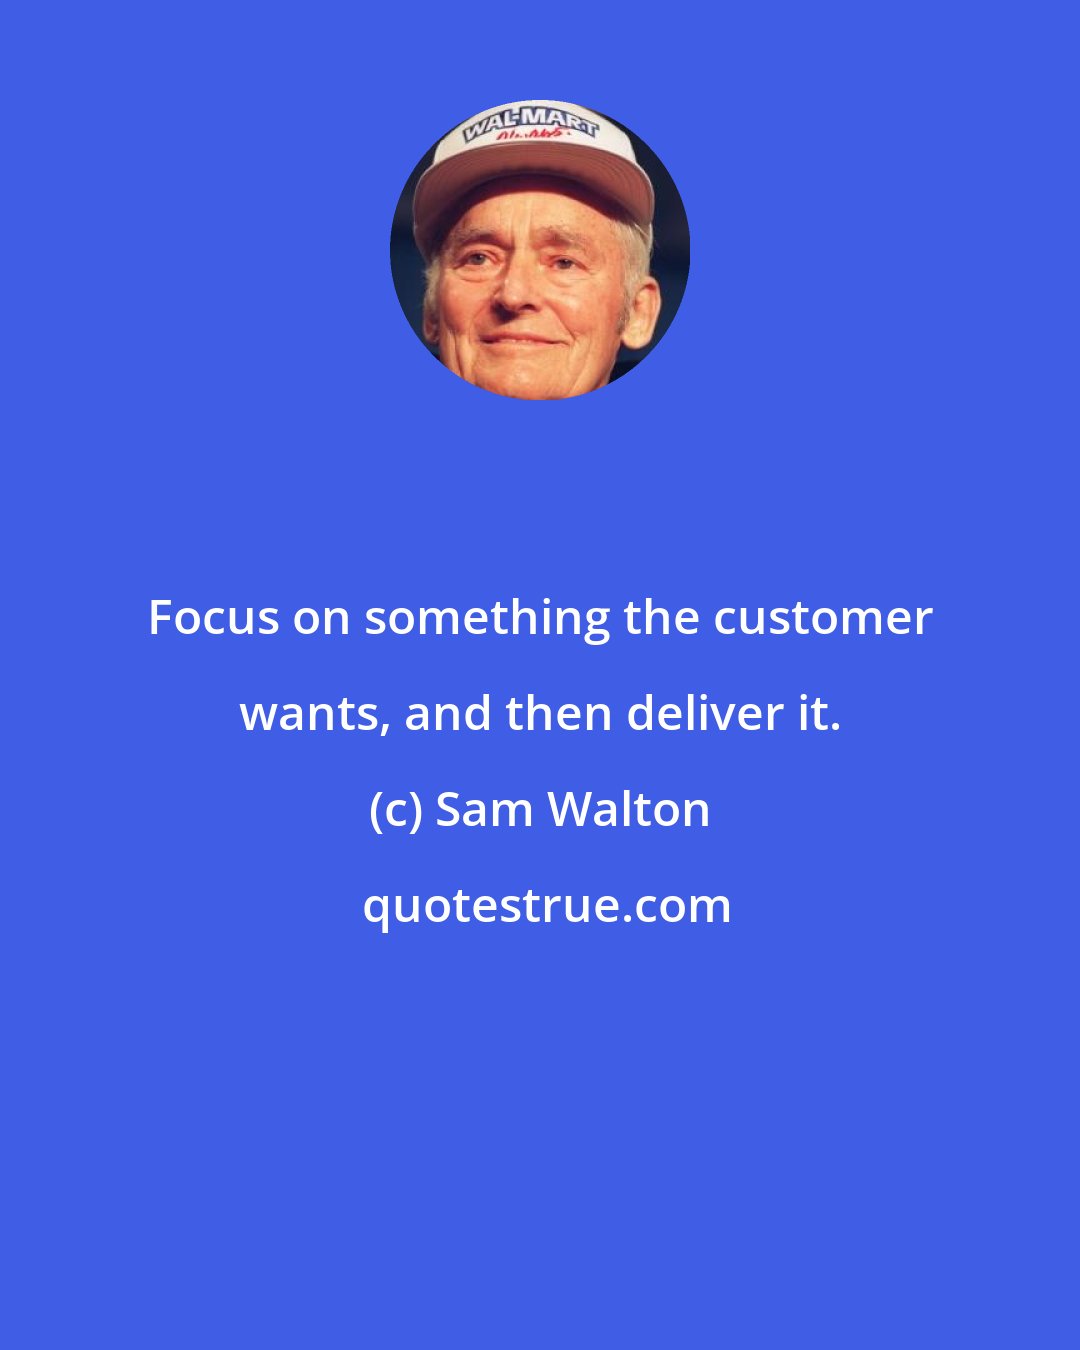 Sam Walton: Focus on something the customer wants, and then deliver it.